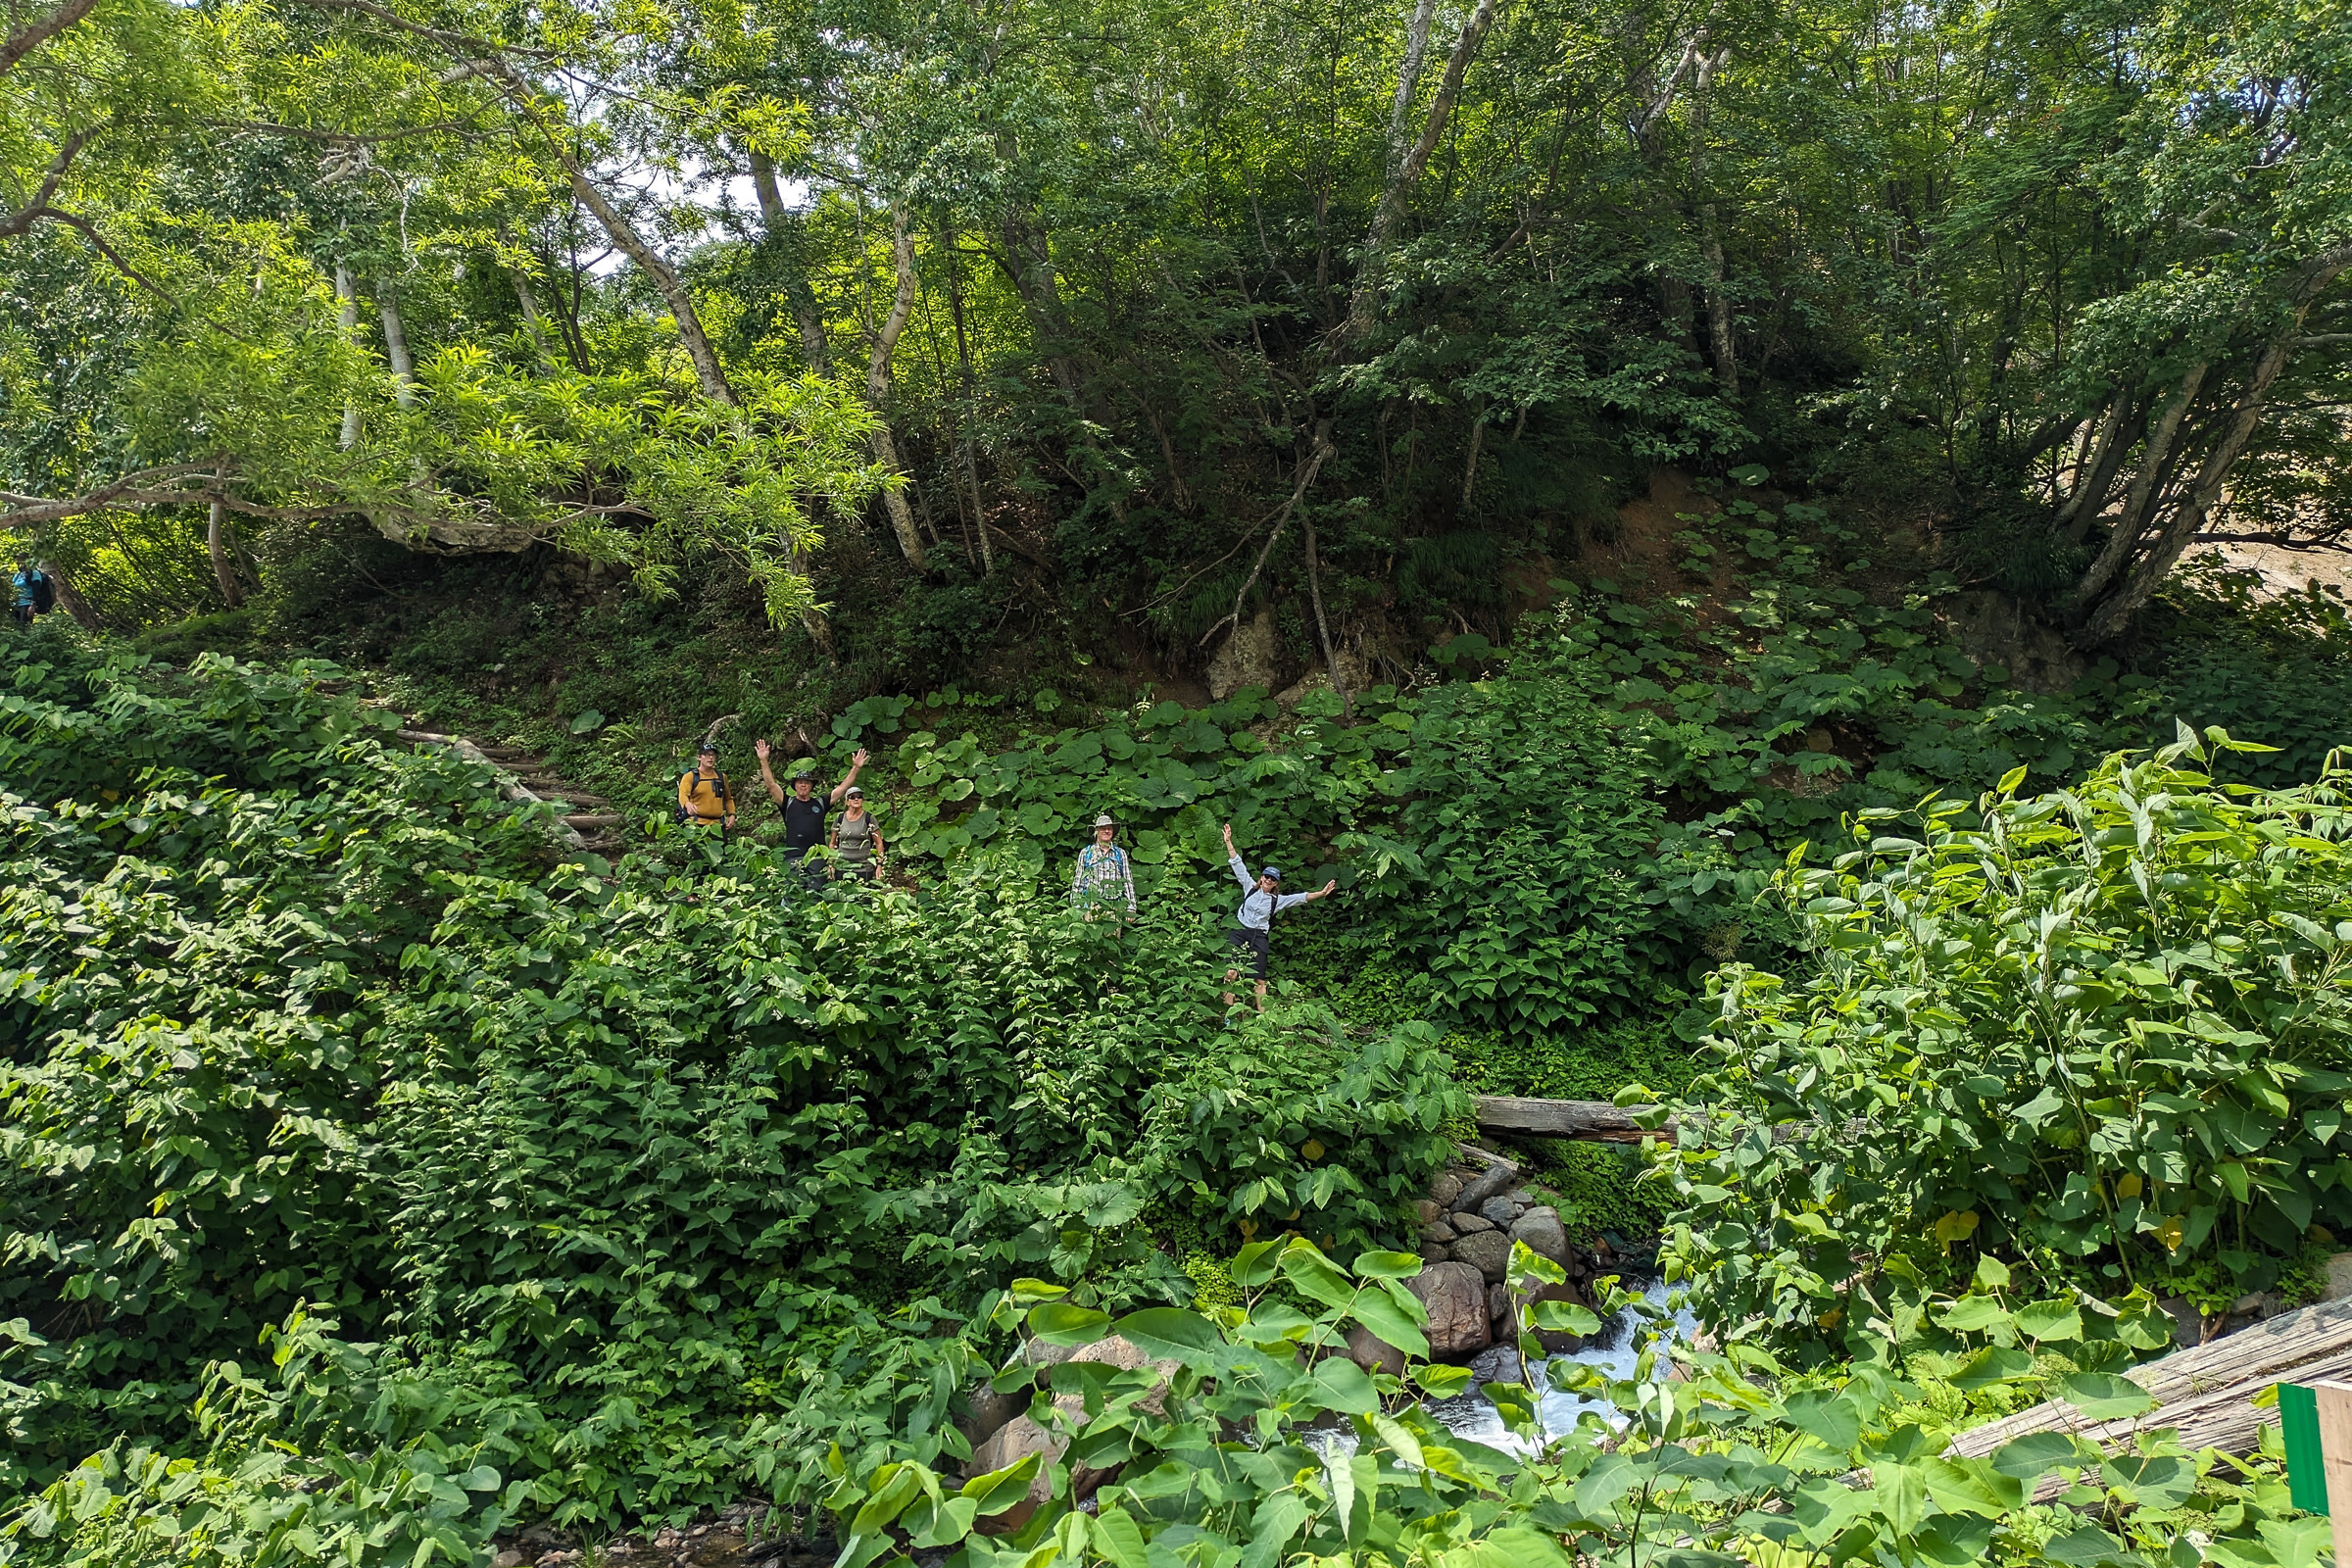 A group of five hikers wave to the camera from afar in a valley, surrounded by foliage.